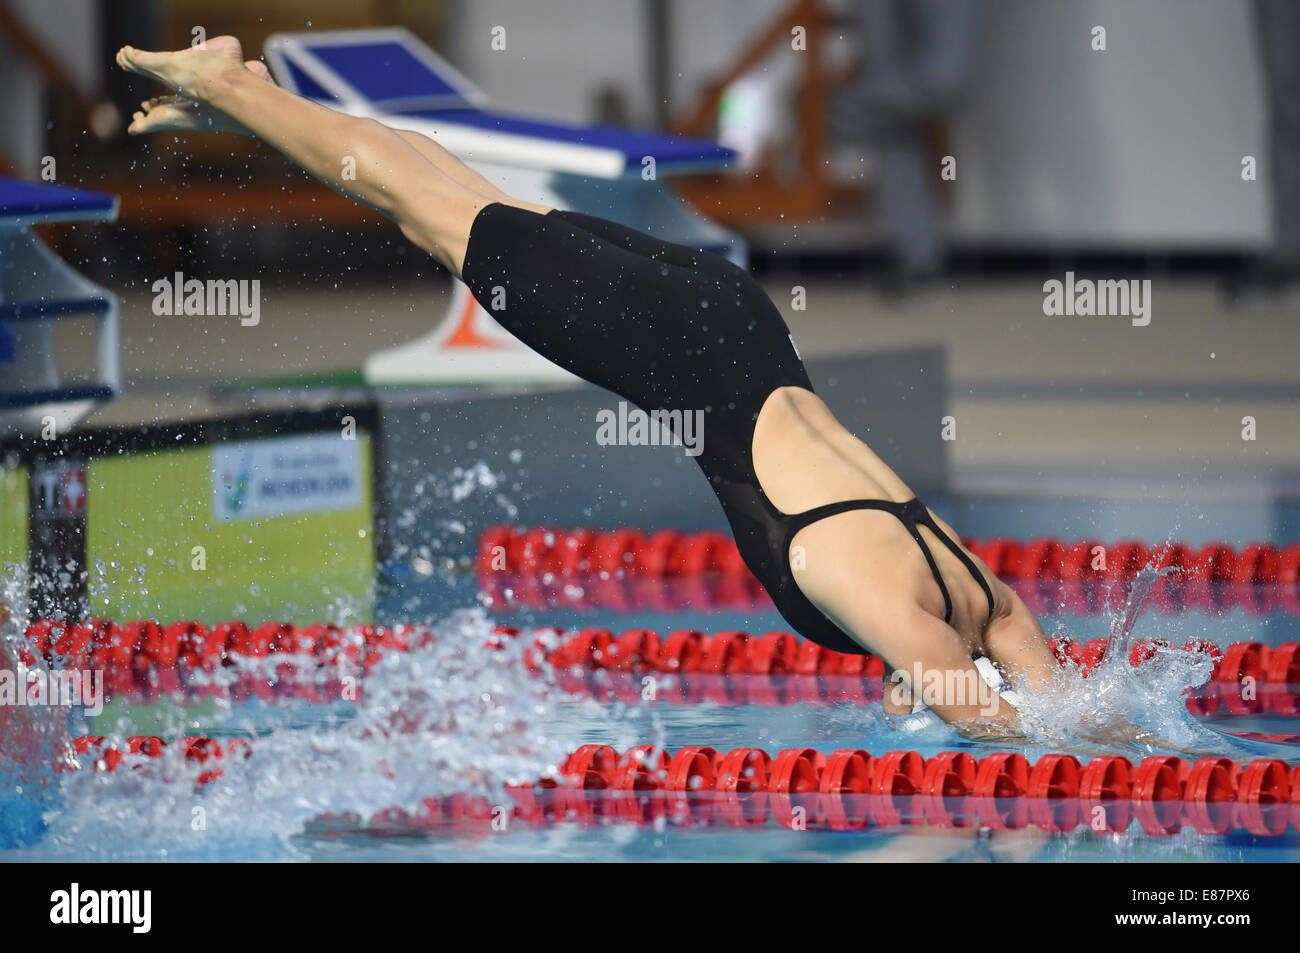 (141002) -- INCHEON, Oct. 2, 2014 (Xinhua) -- Bian Yufei of China competes during the women's individual swimming match of modern pentathlon at the 17th Asian Games in Incheon, South Korea, Oct. 2, 2014. (Xinhua/Xie Haining)(mcg) Stock Photo